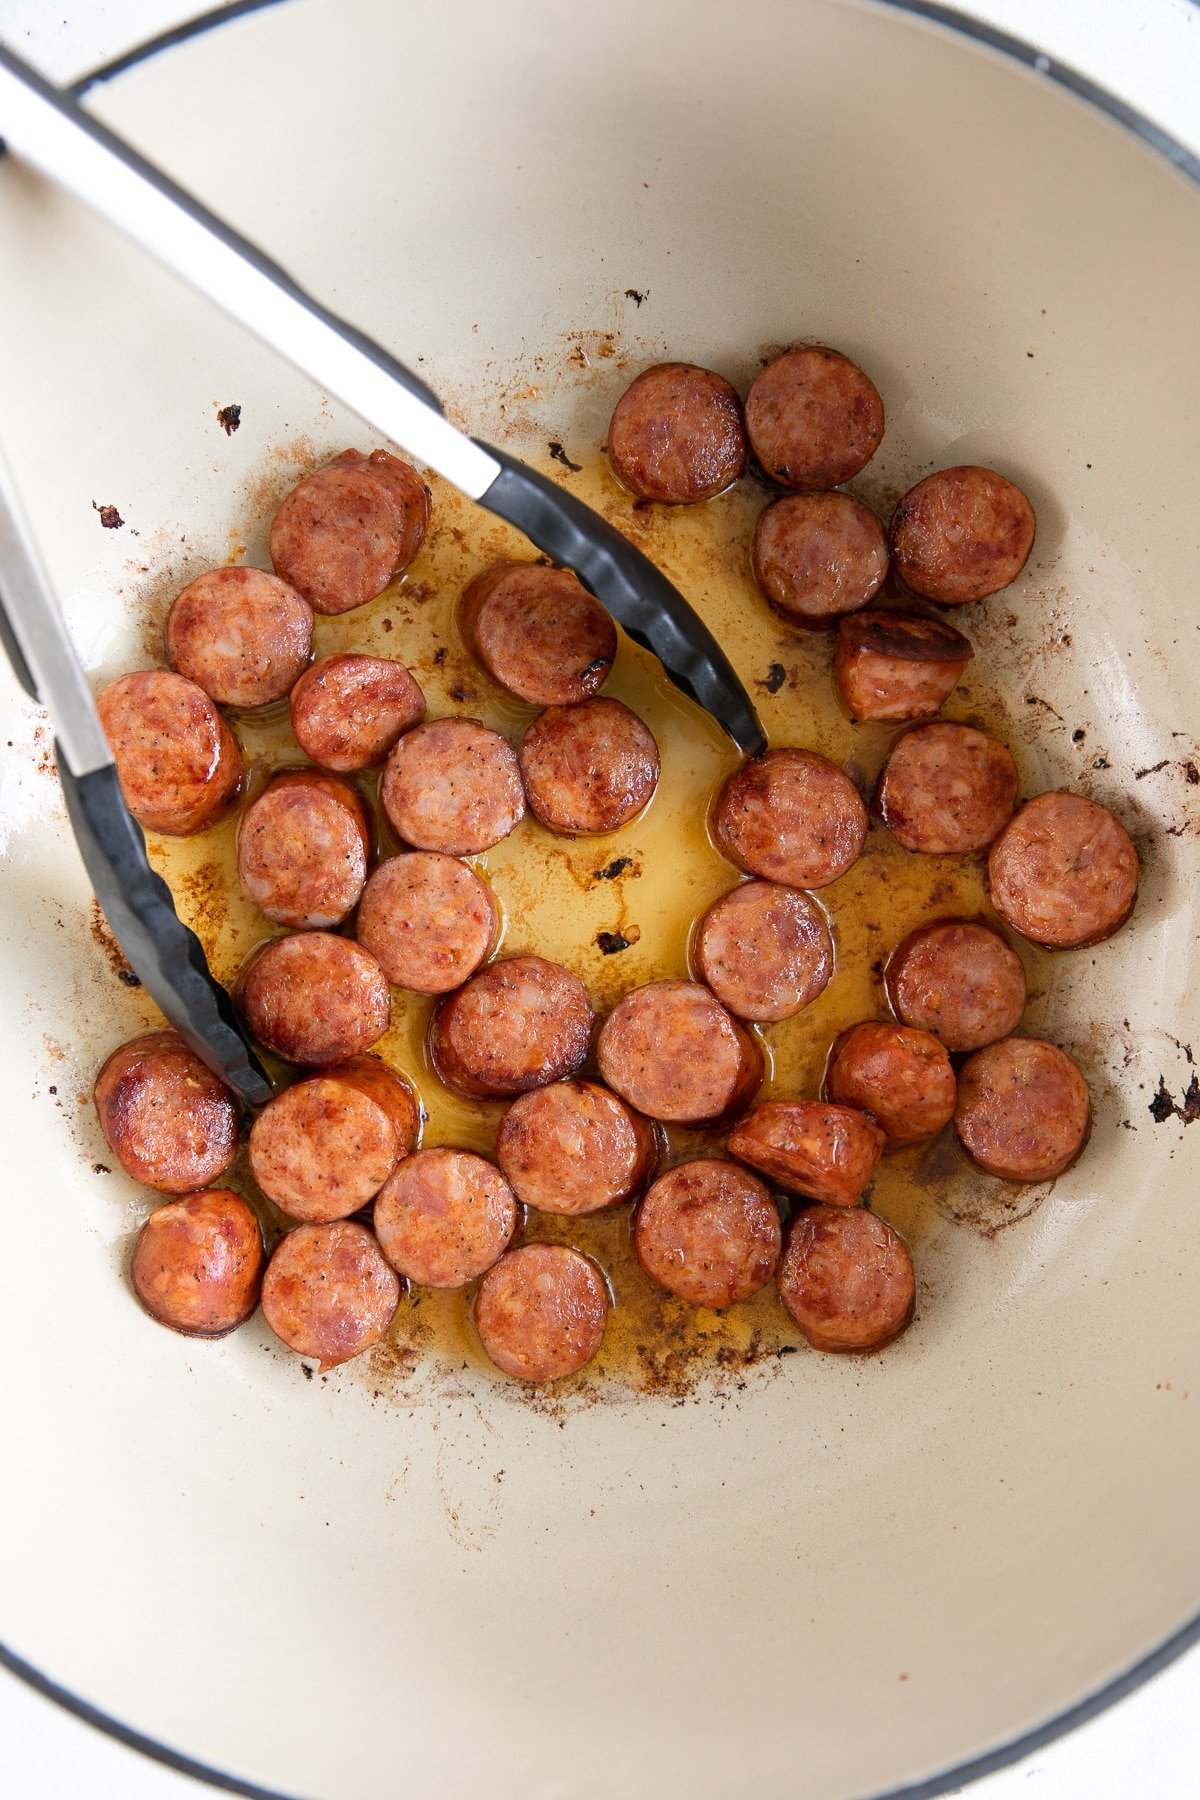 Sliced andouille sausage cooking in a large Dutch oven.